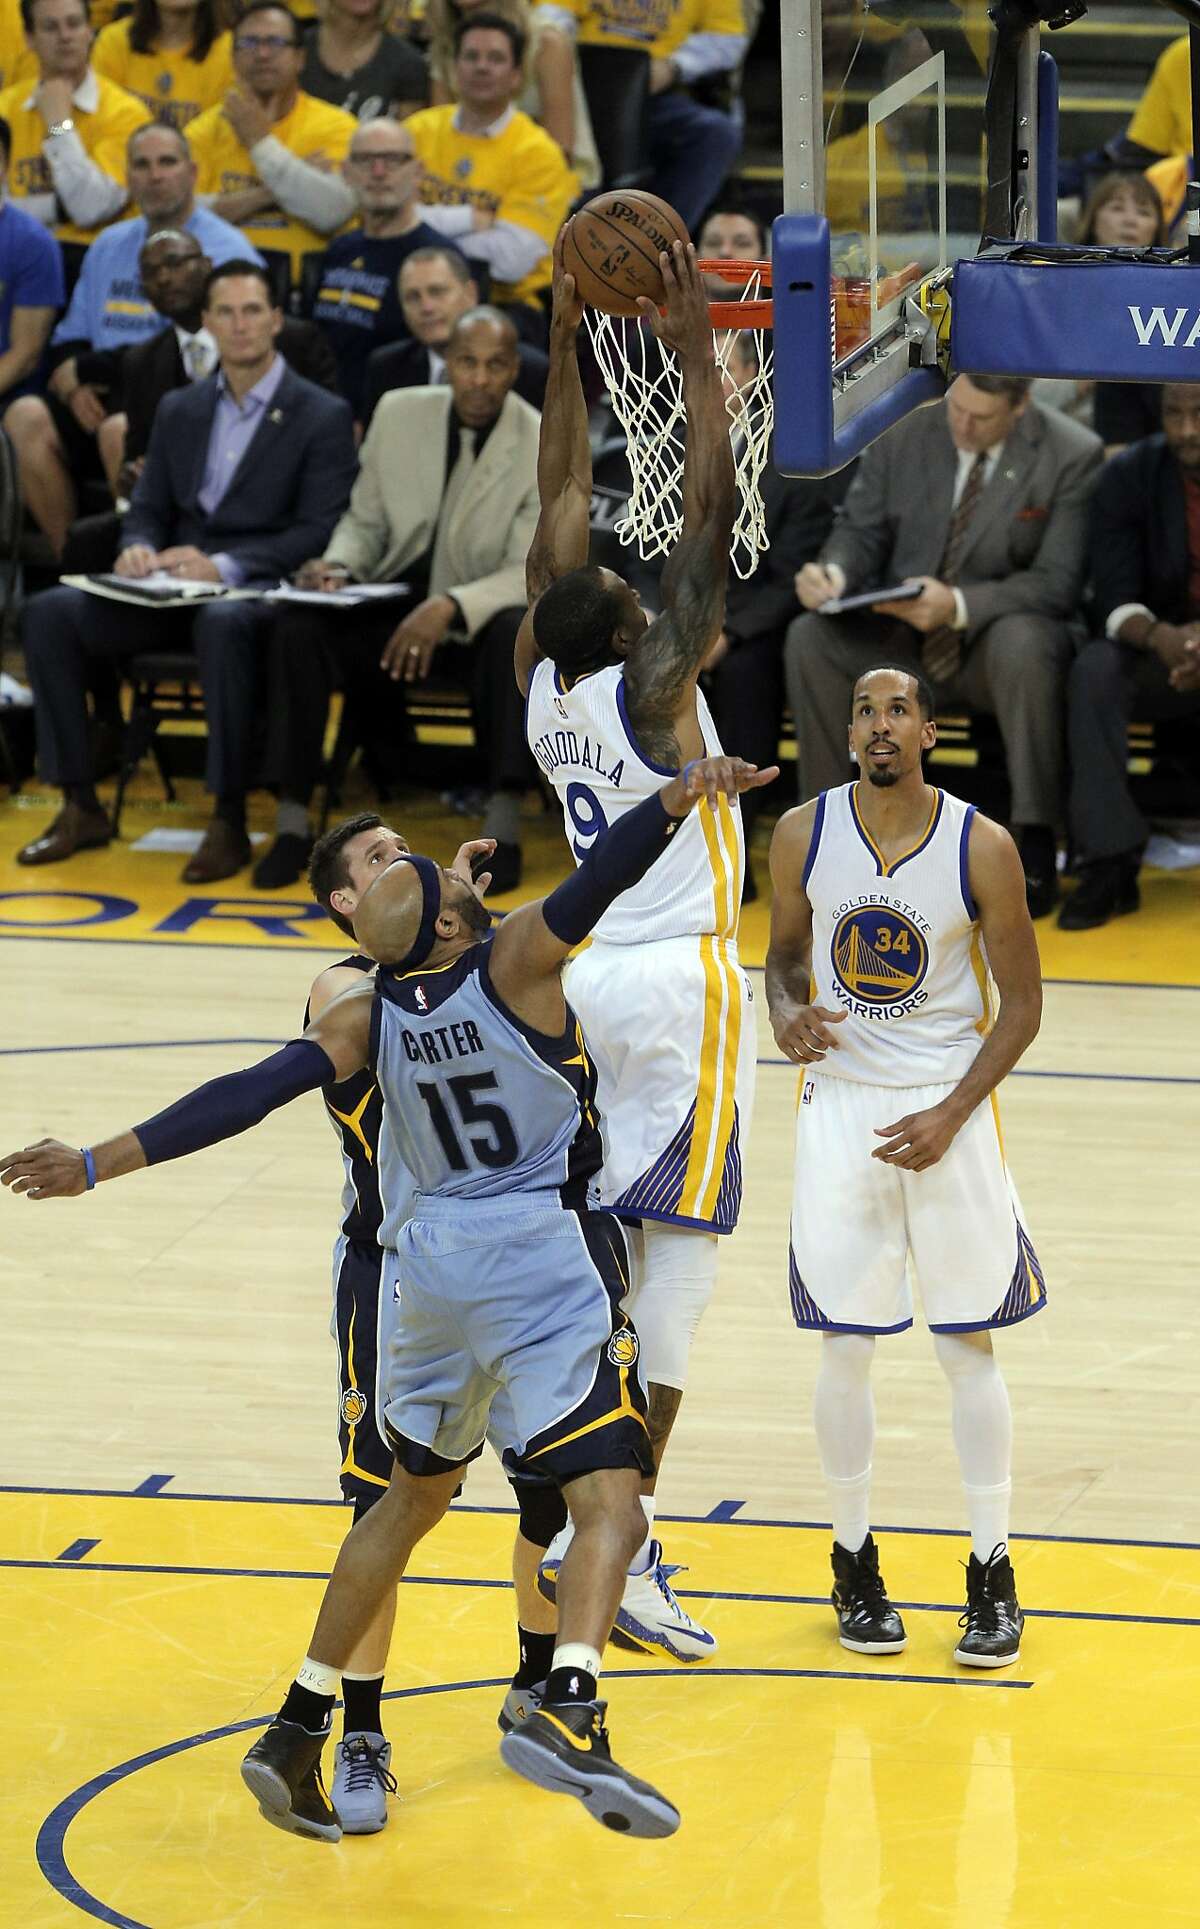 Andre Iguodala (9) dunks the ball In the second half. The Golden State Warriors played the Memphis Grizzlies in Game 5 of the Western Conference Semifinals at Oracle Arena in Oakland, Calif., on Wednesday, May 13, 2015. The Warriors defeated the Grizzlies 98-78.